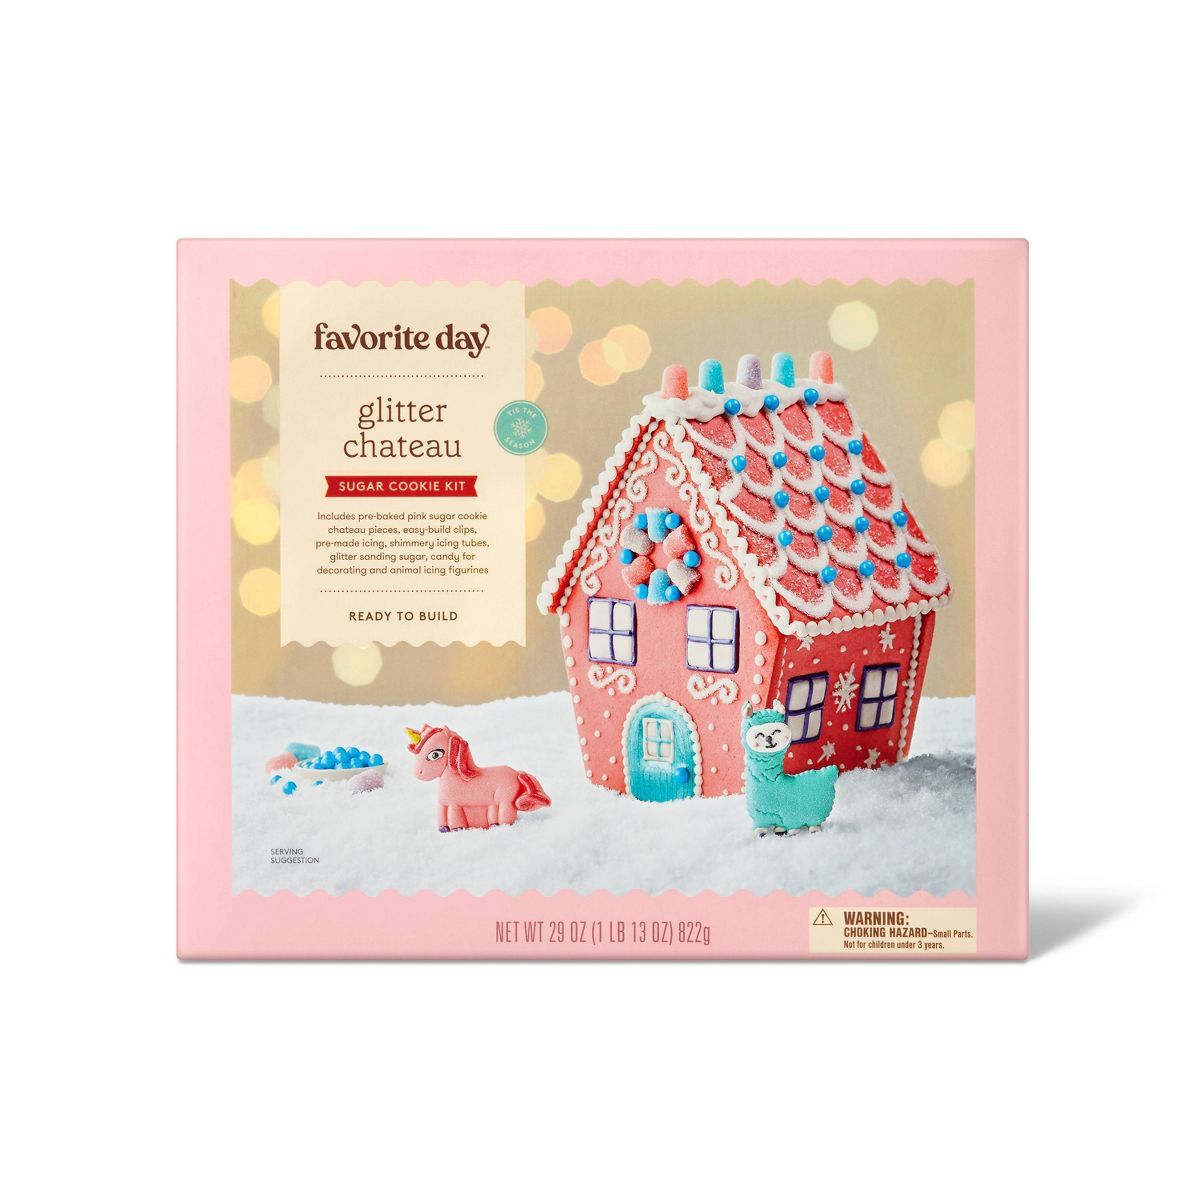 Holiday Glitter Chateau Sugar Cookie Gingerbread House Kit - 29oz - Favorite Day™ | Target